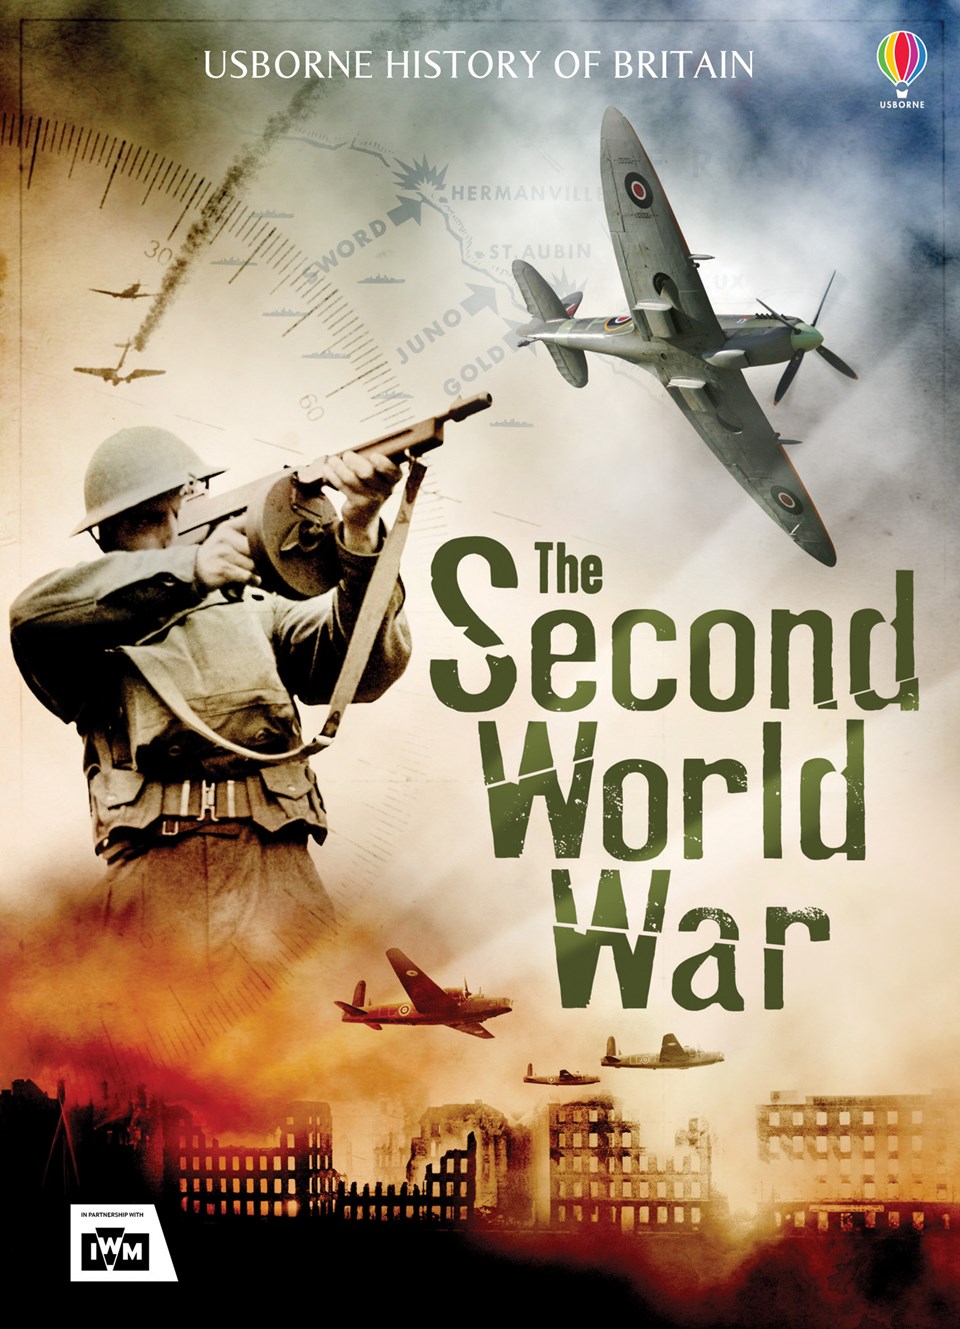 History of Britain: The Second World War